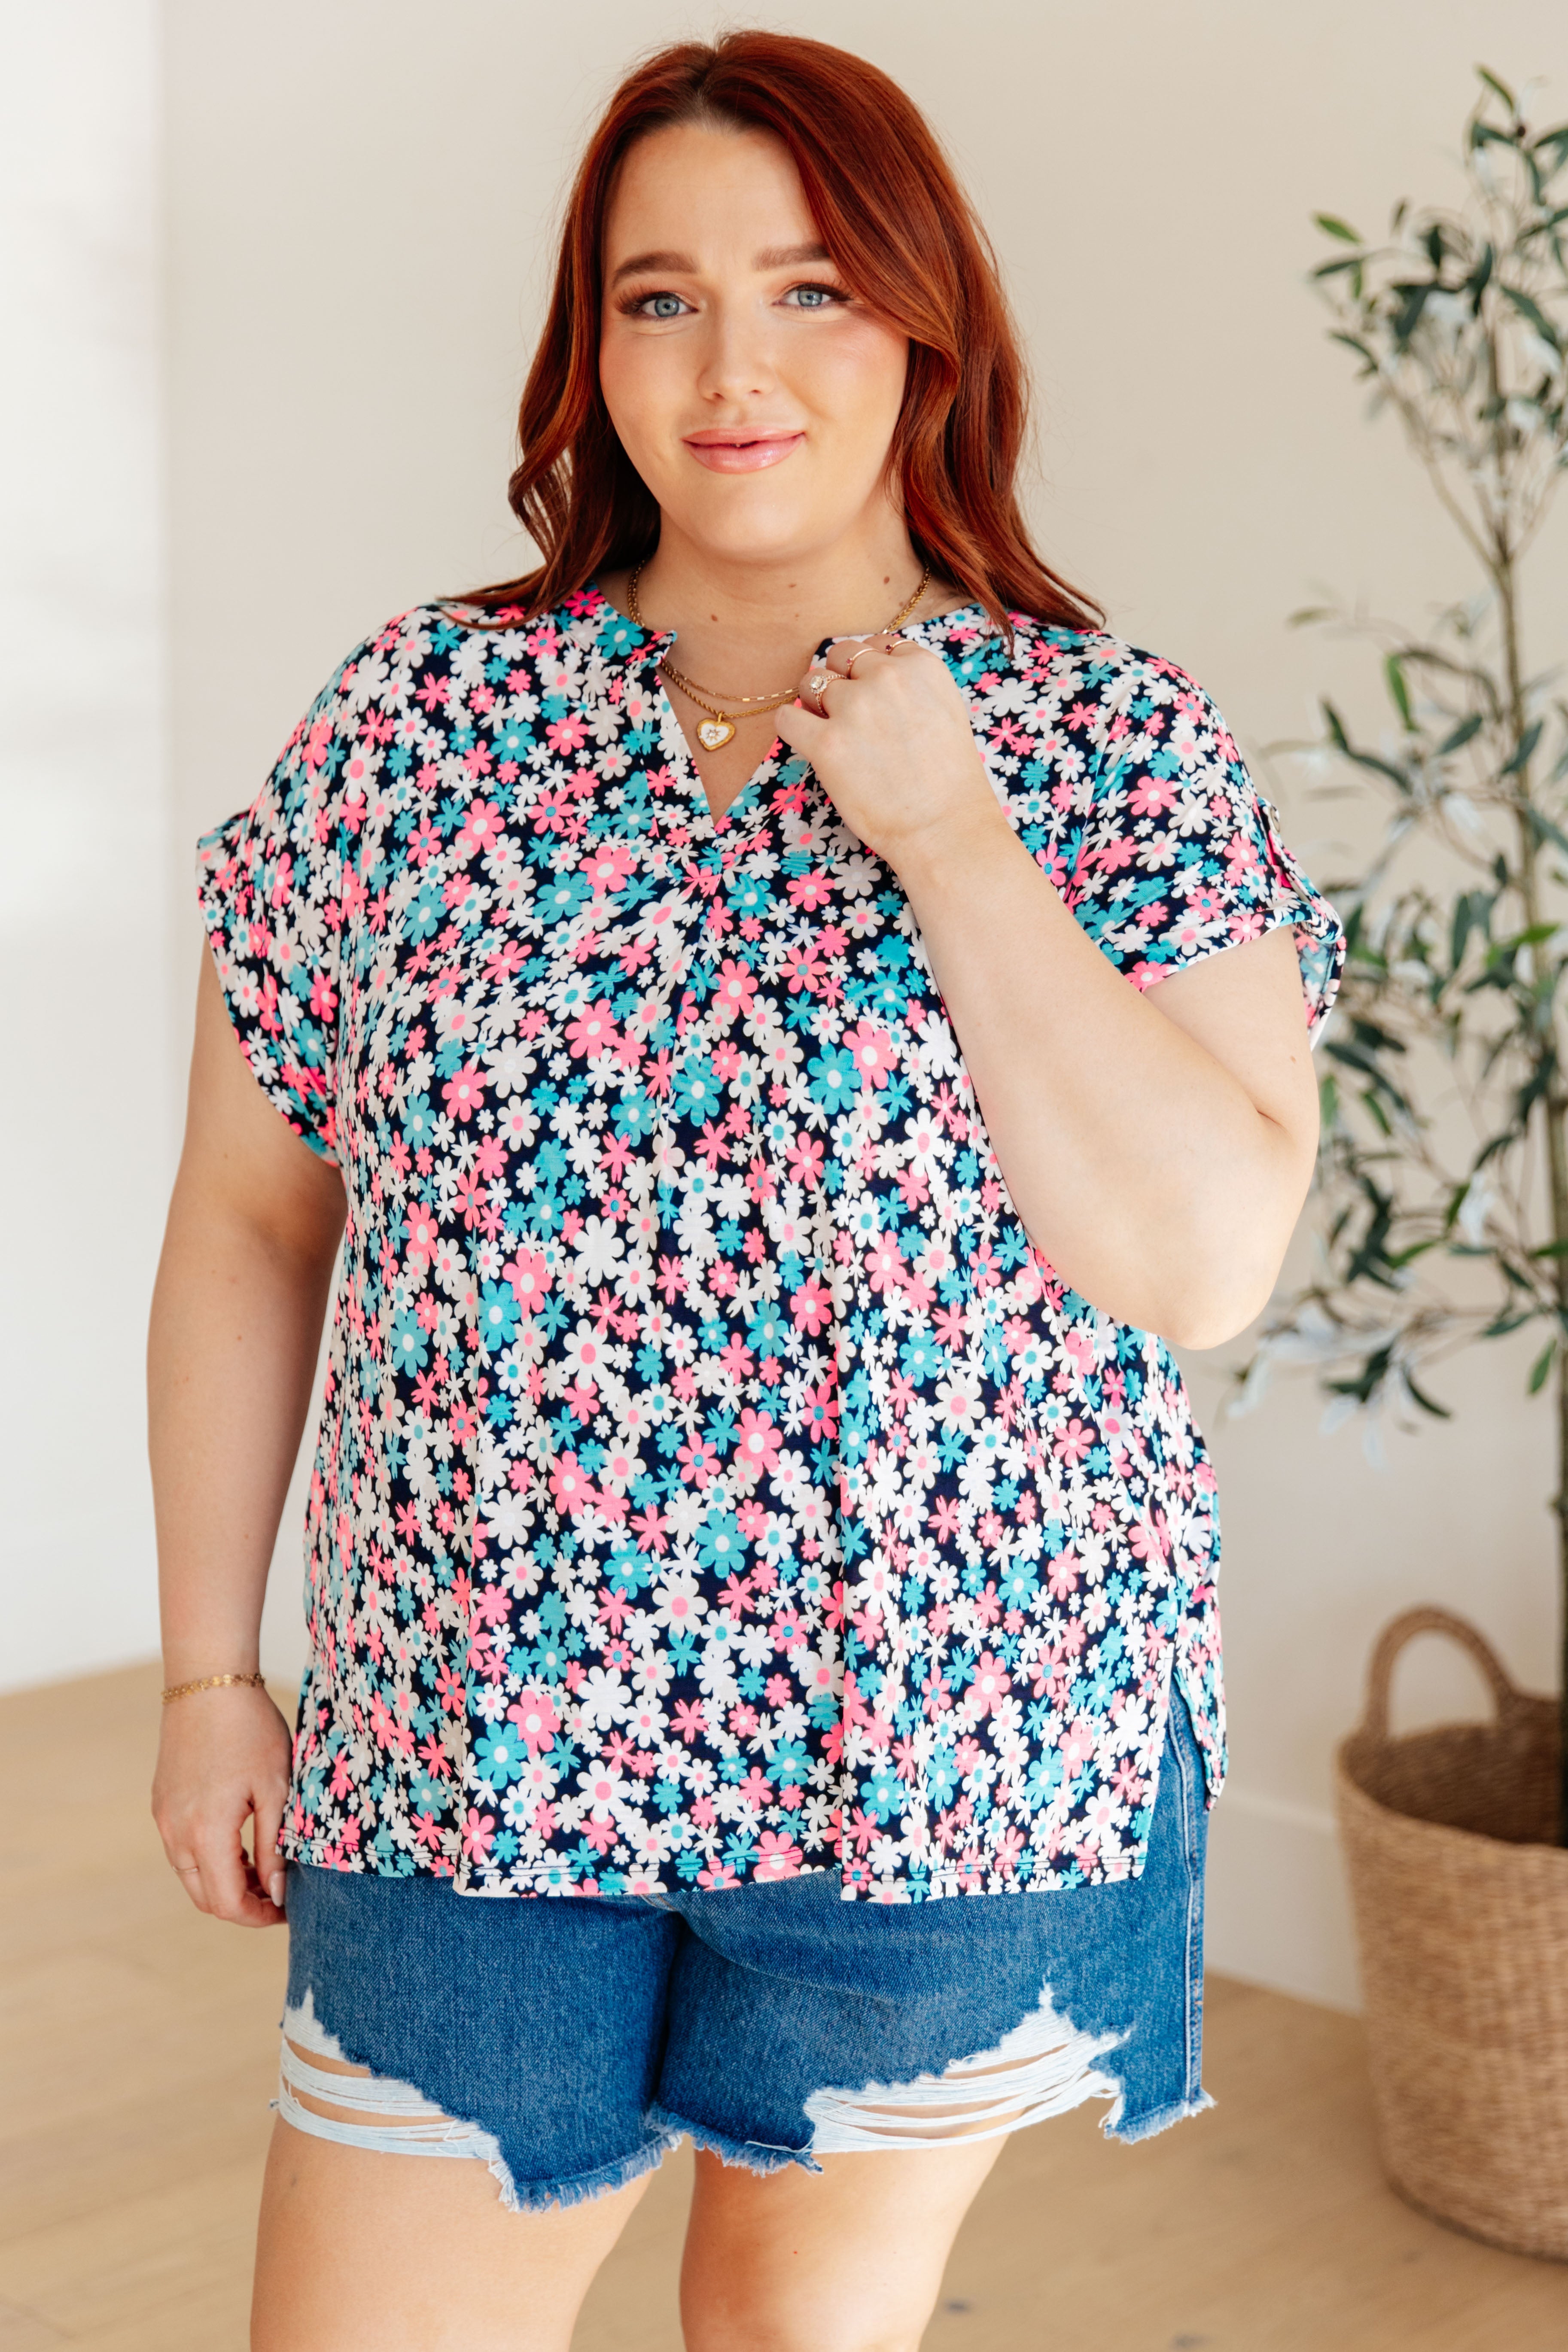 Lizzy Cap Sleeve Top in Navy and Hot Pink Floral Womens Ave Shops   